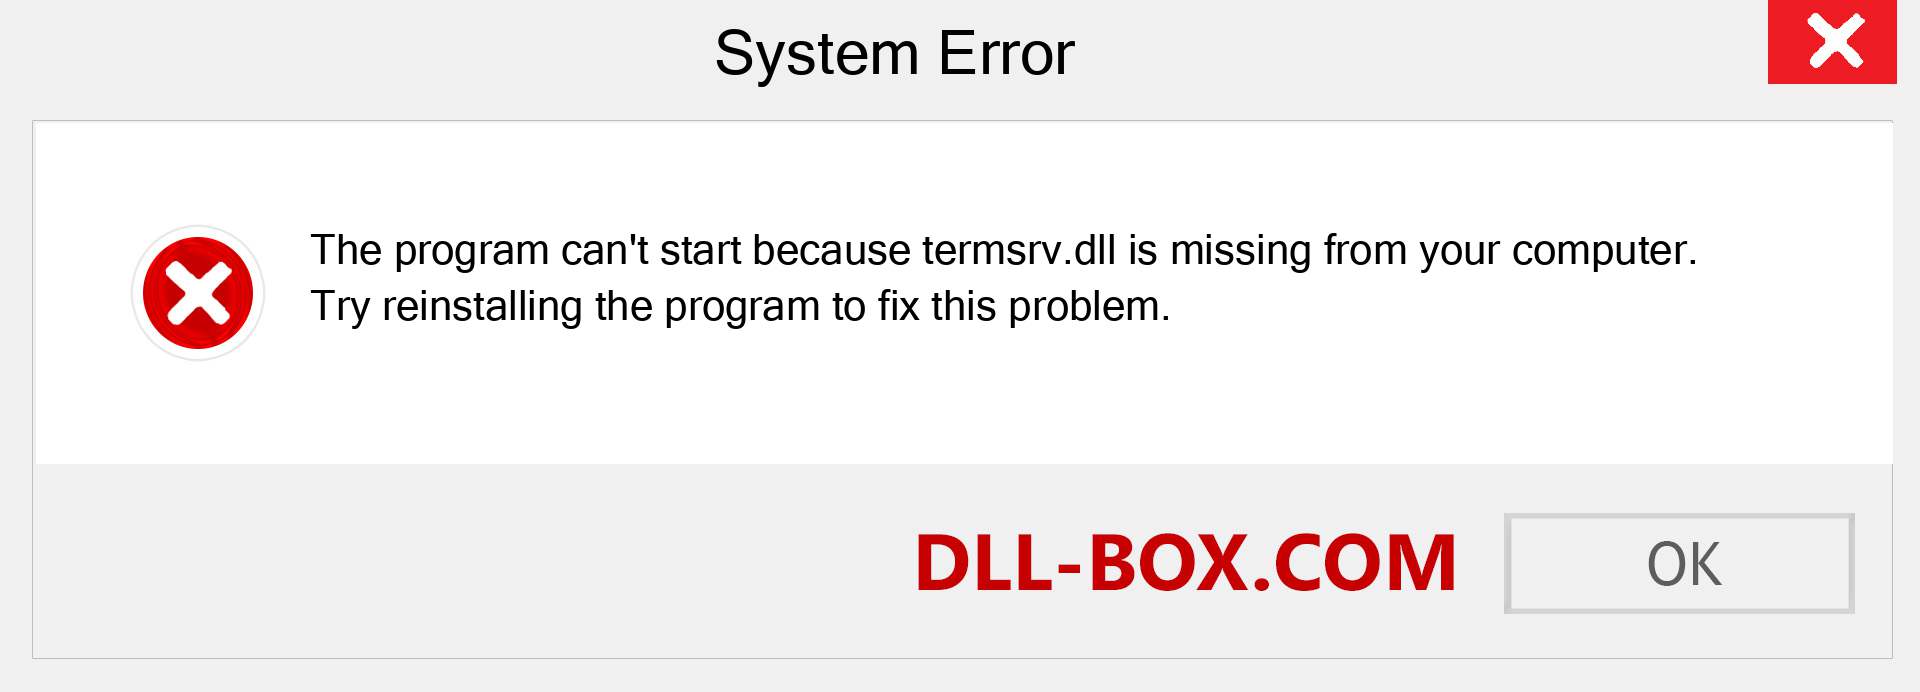  termsrv.dll file is missing?. Download for Windows 7, 8, 10 - Fix  termsrv dll Missing Error on Windows, photos, images